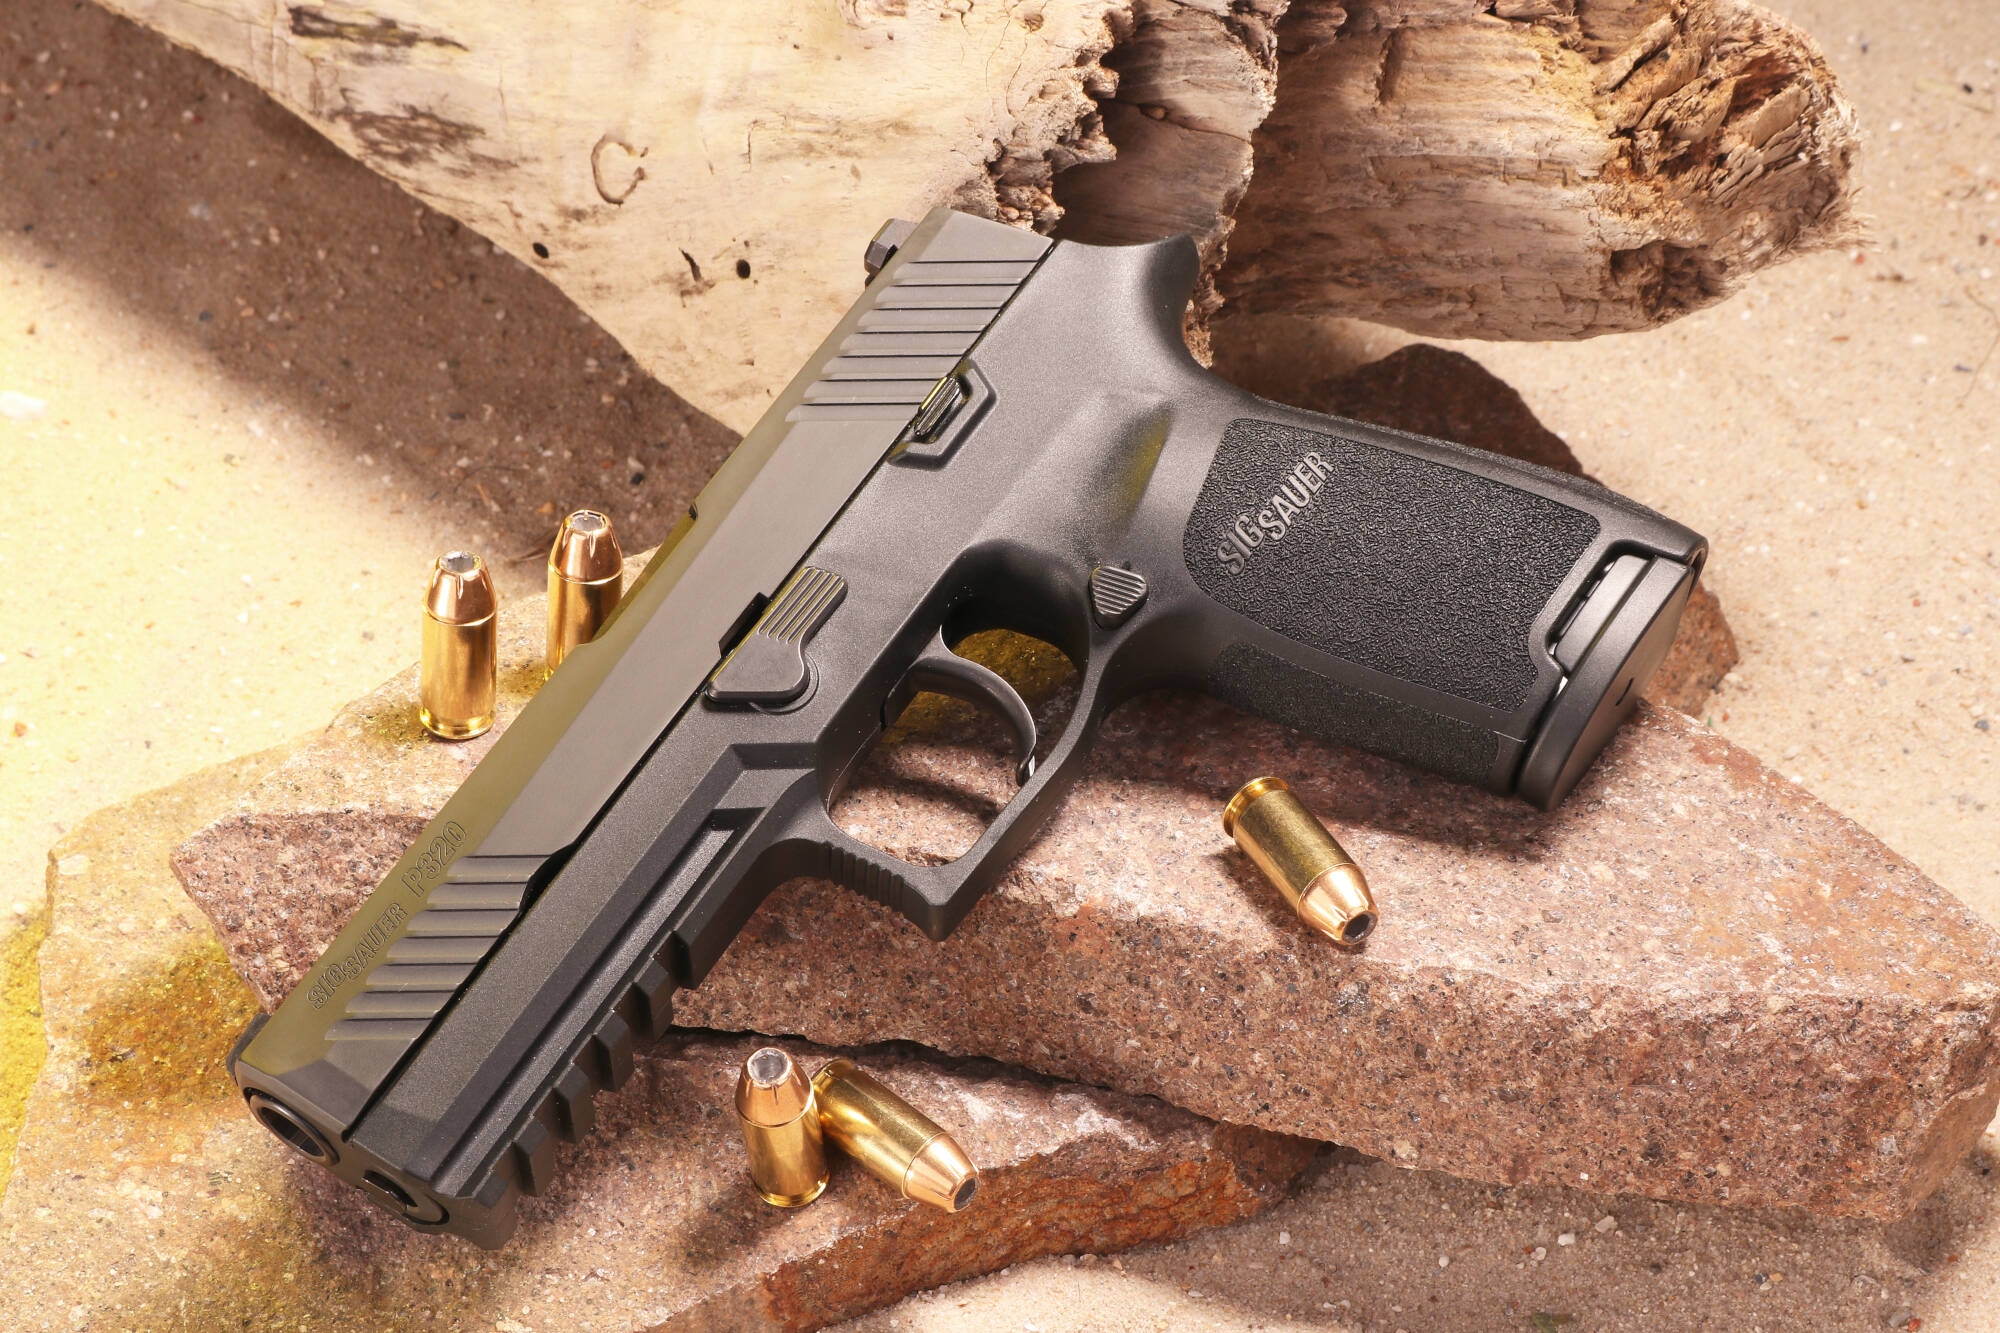 Test: SIG Sauer P320 in .45 ACP - The SIG Sauer service pistol in the  popular US caliber